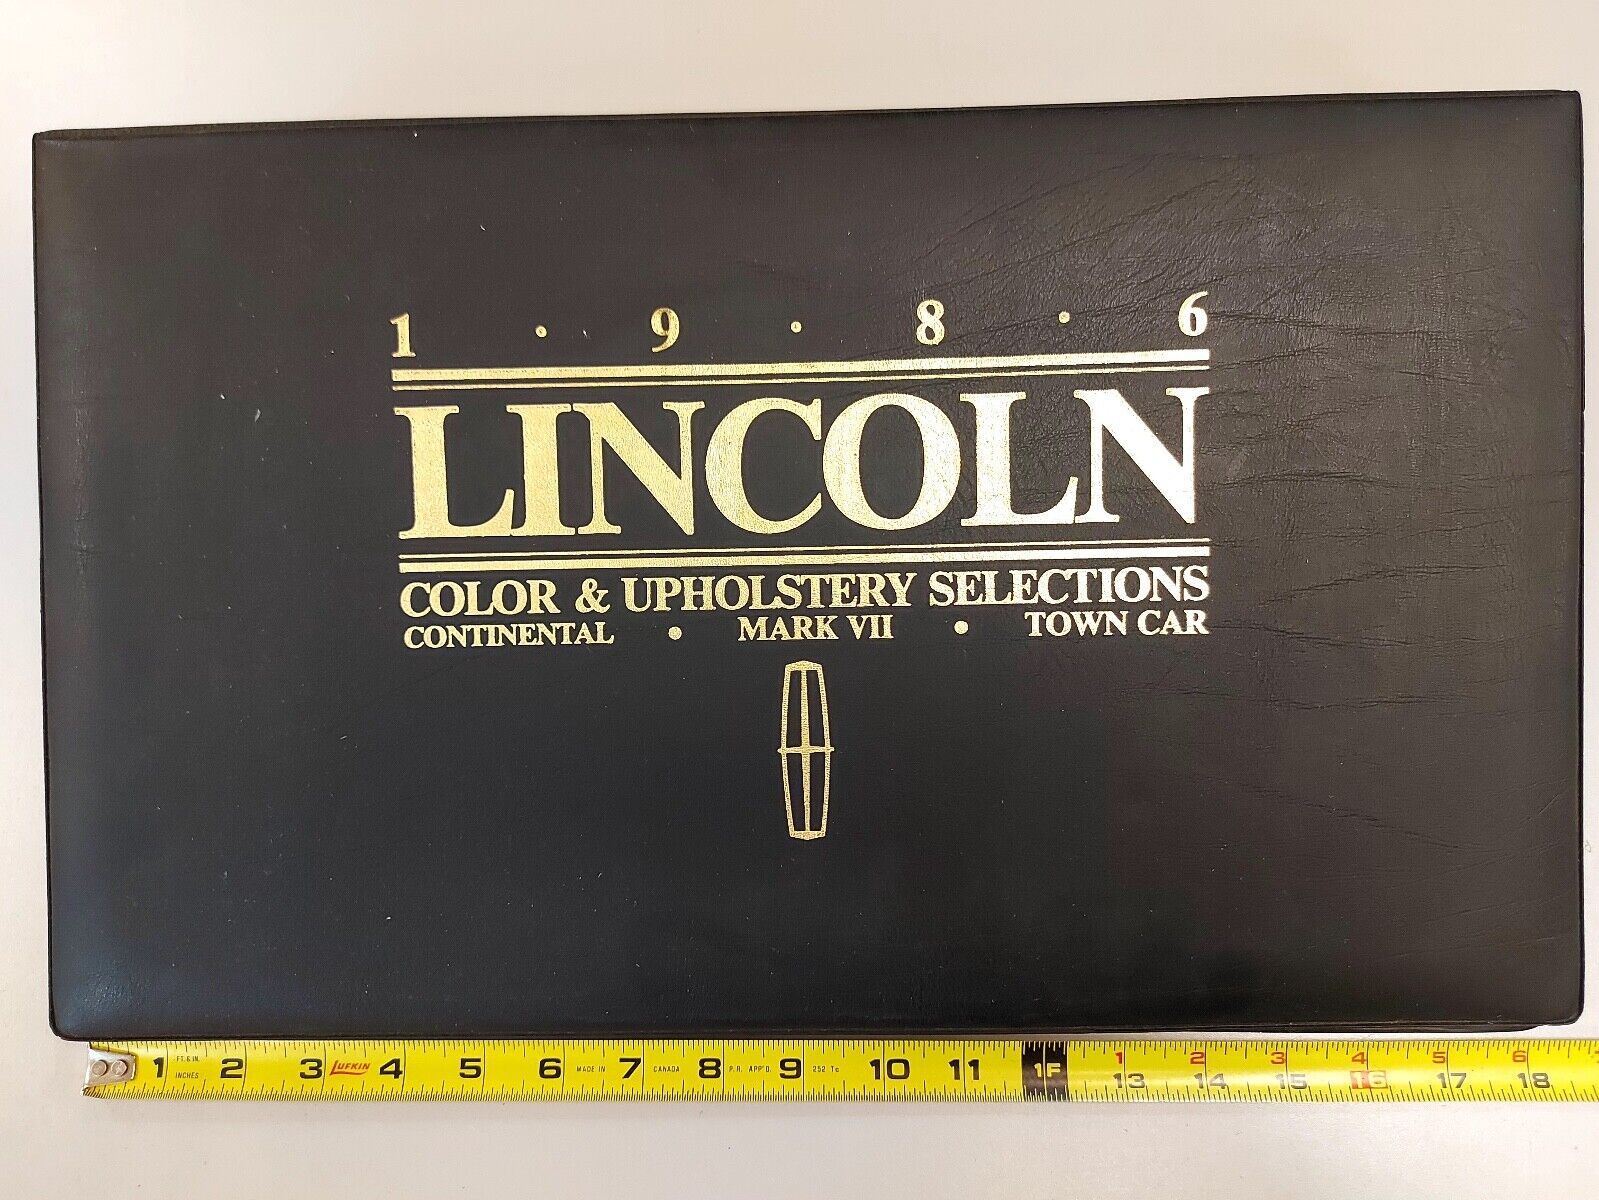 1986 LINCOLN COLOR & UPHOLSTERY SELECTIONS CONTINENTAL TOWN CAR MARK VII DEALER